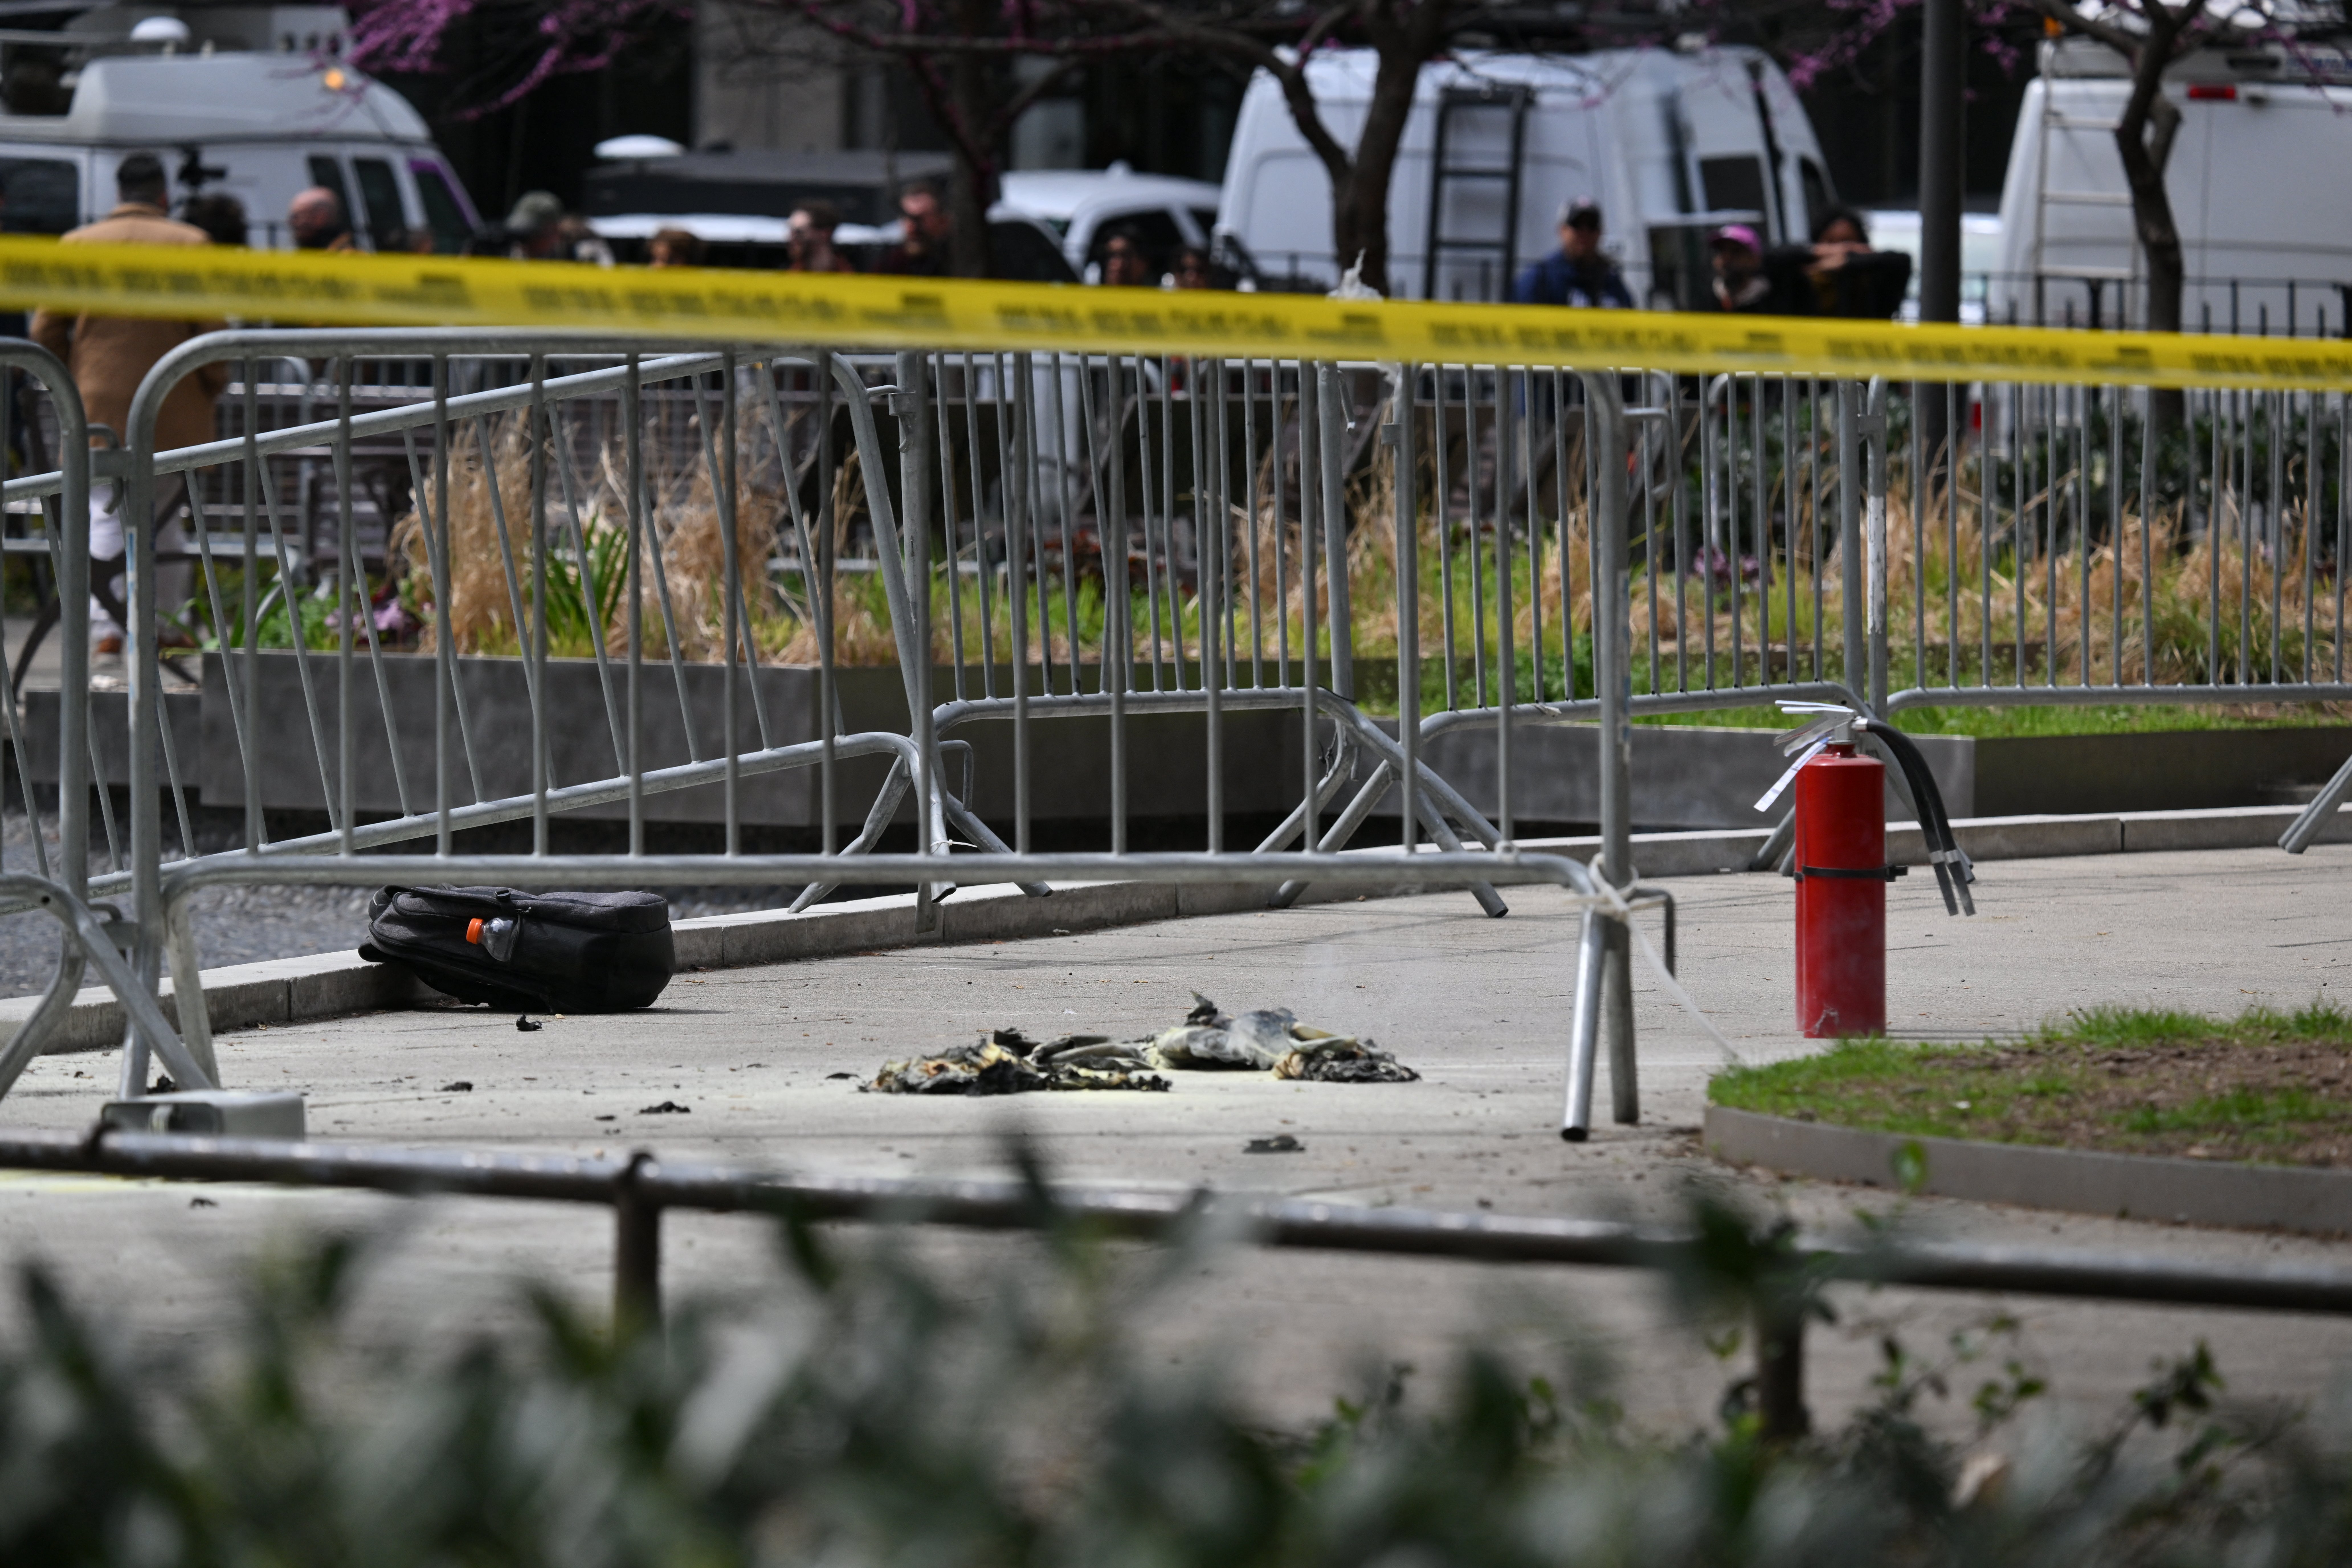 A fire extinguisher remains on the scene outside the park where Azzarello self-immolated on Friday